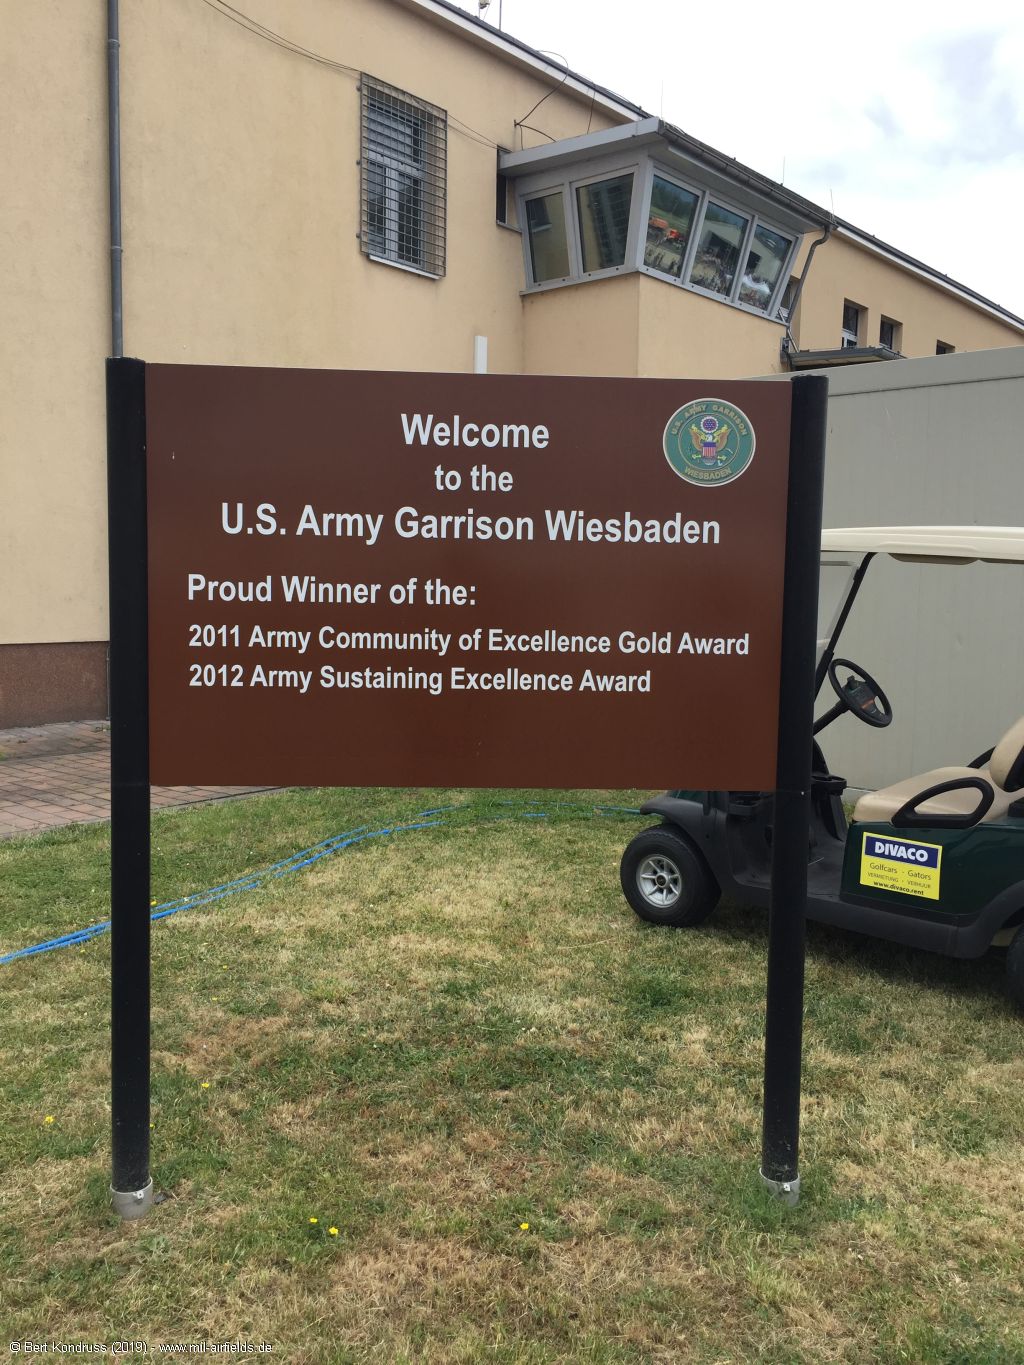 Sign: Welcome to the U.S. Army Garrison Wiesbaden